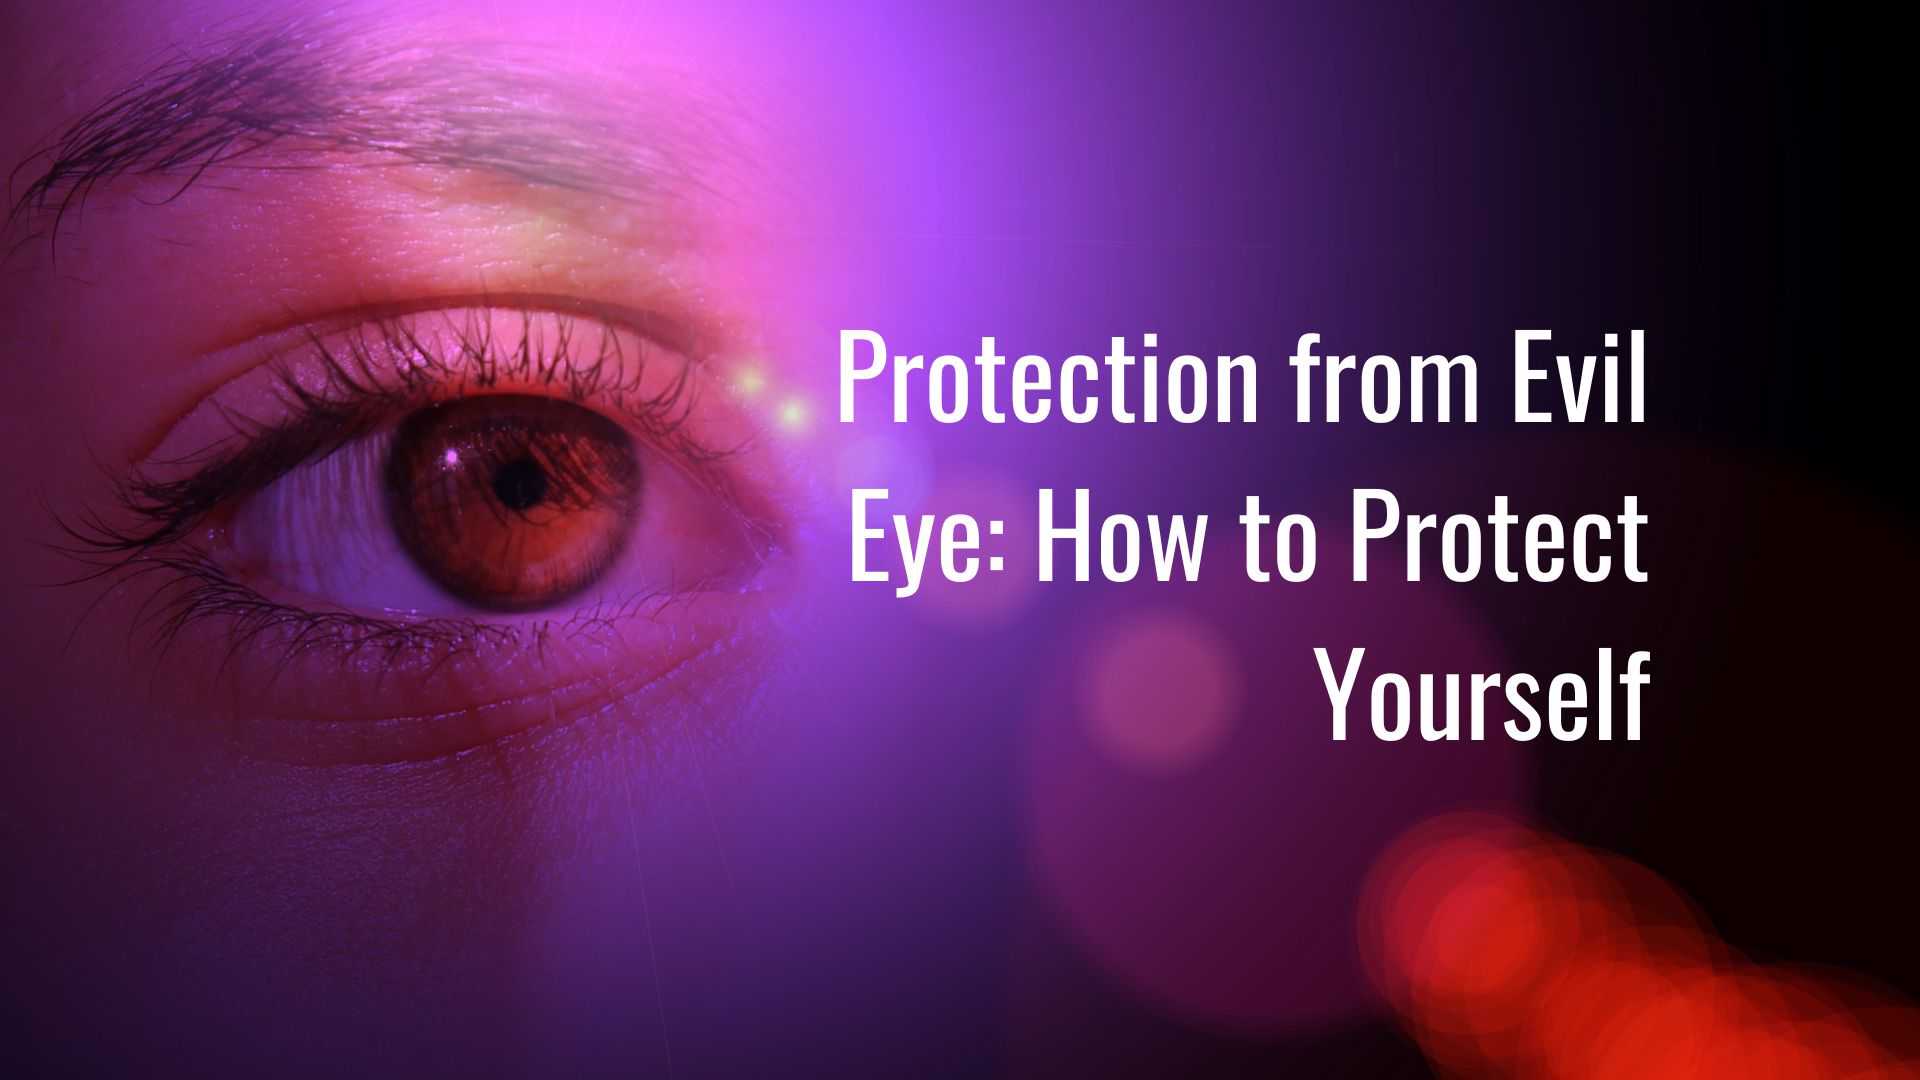 Protection from Evil Eye: How to Protect Yourself from Evil Eye